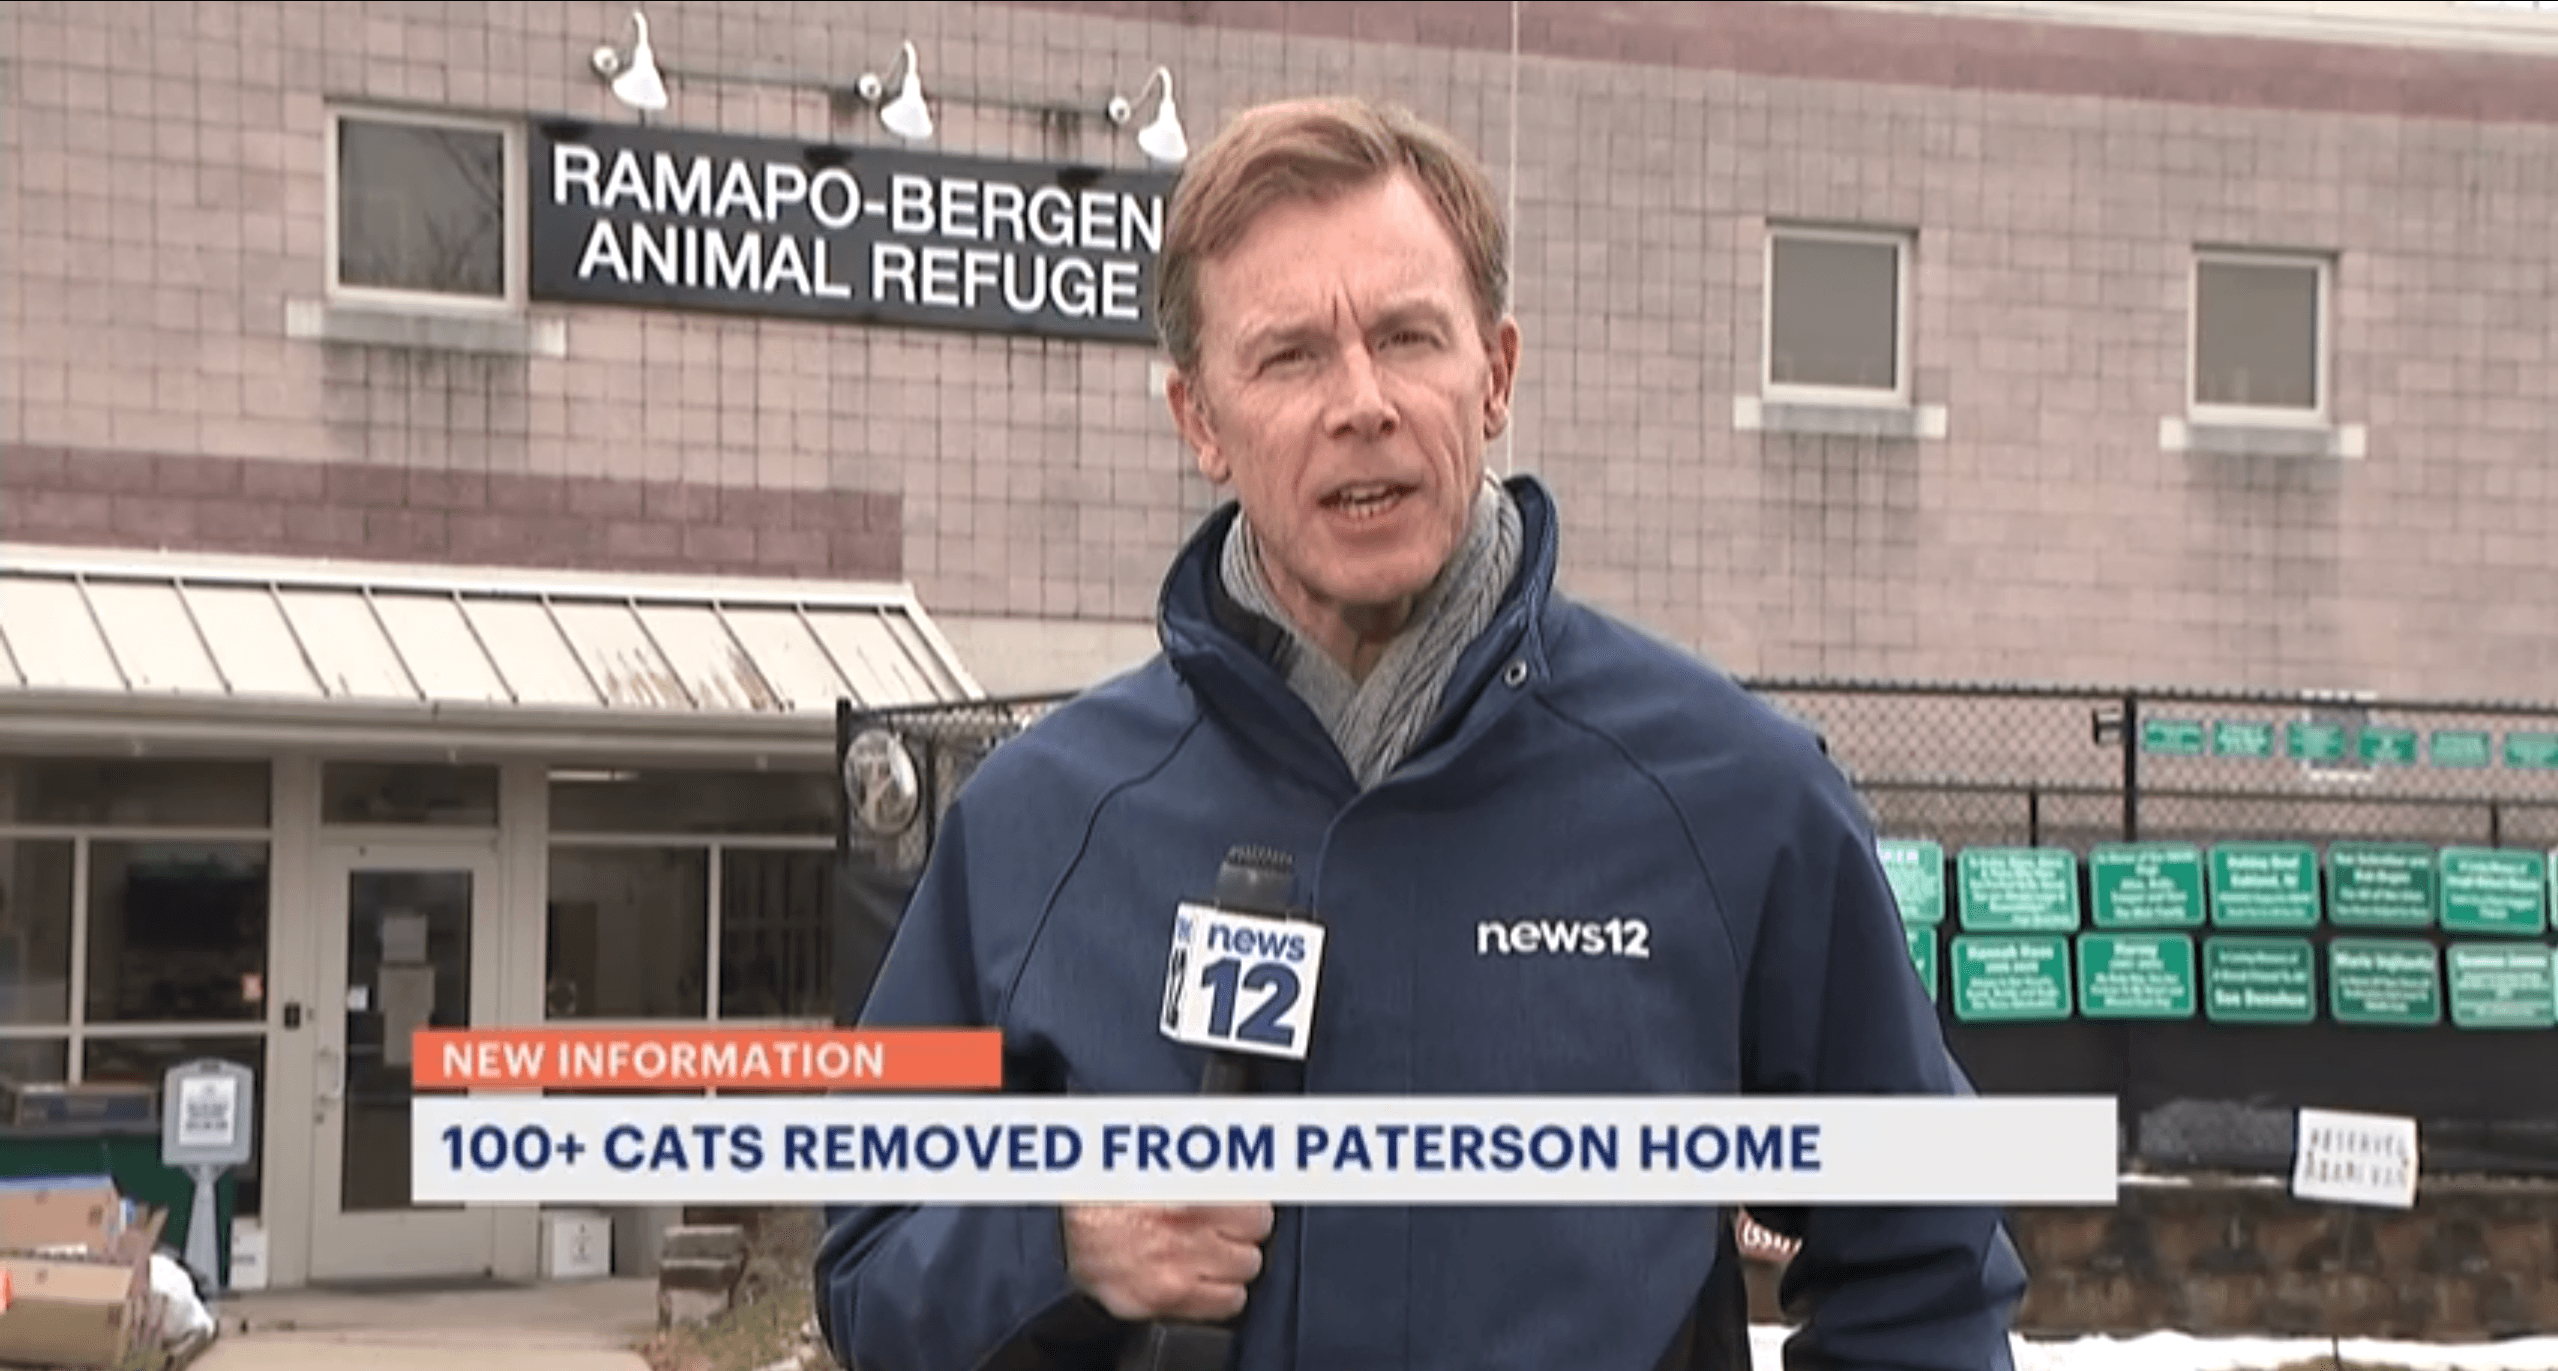 'It’s beyond deplorable.' 180 cats removed from Paterson home, officials say (News 12 New Jersey)